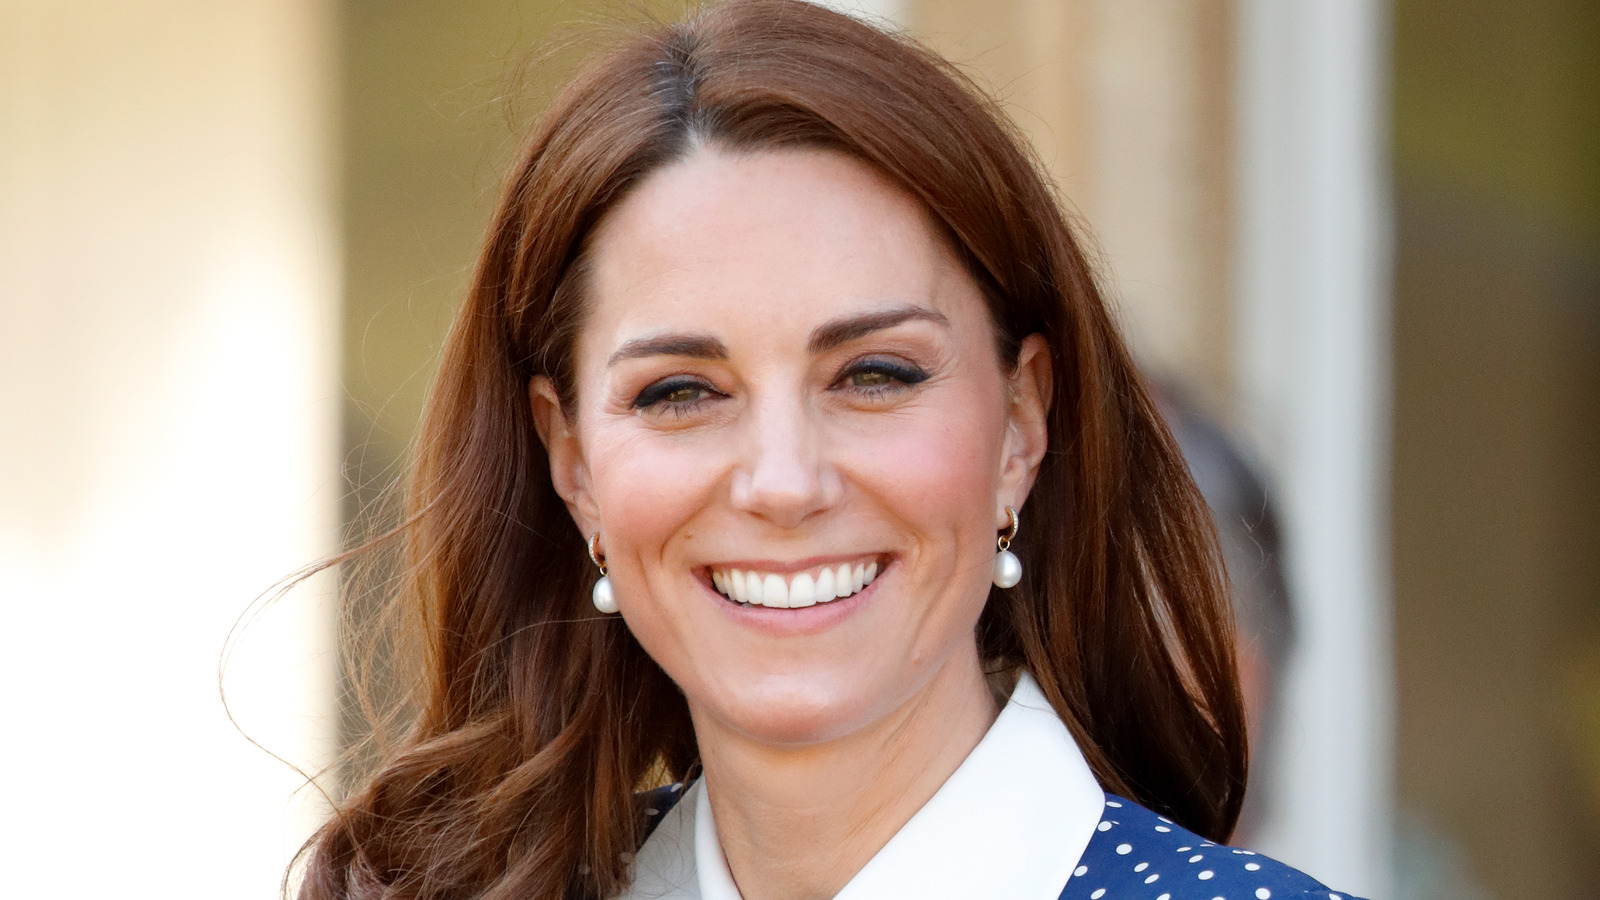 Unbelievable Rumors About Kate Middleton's Life